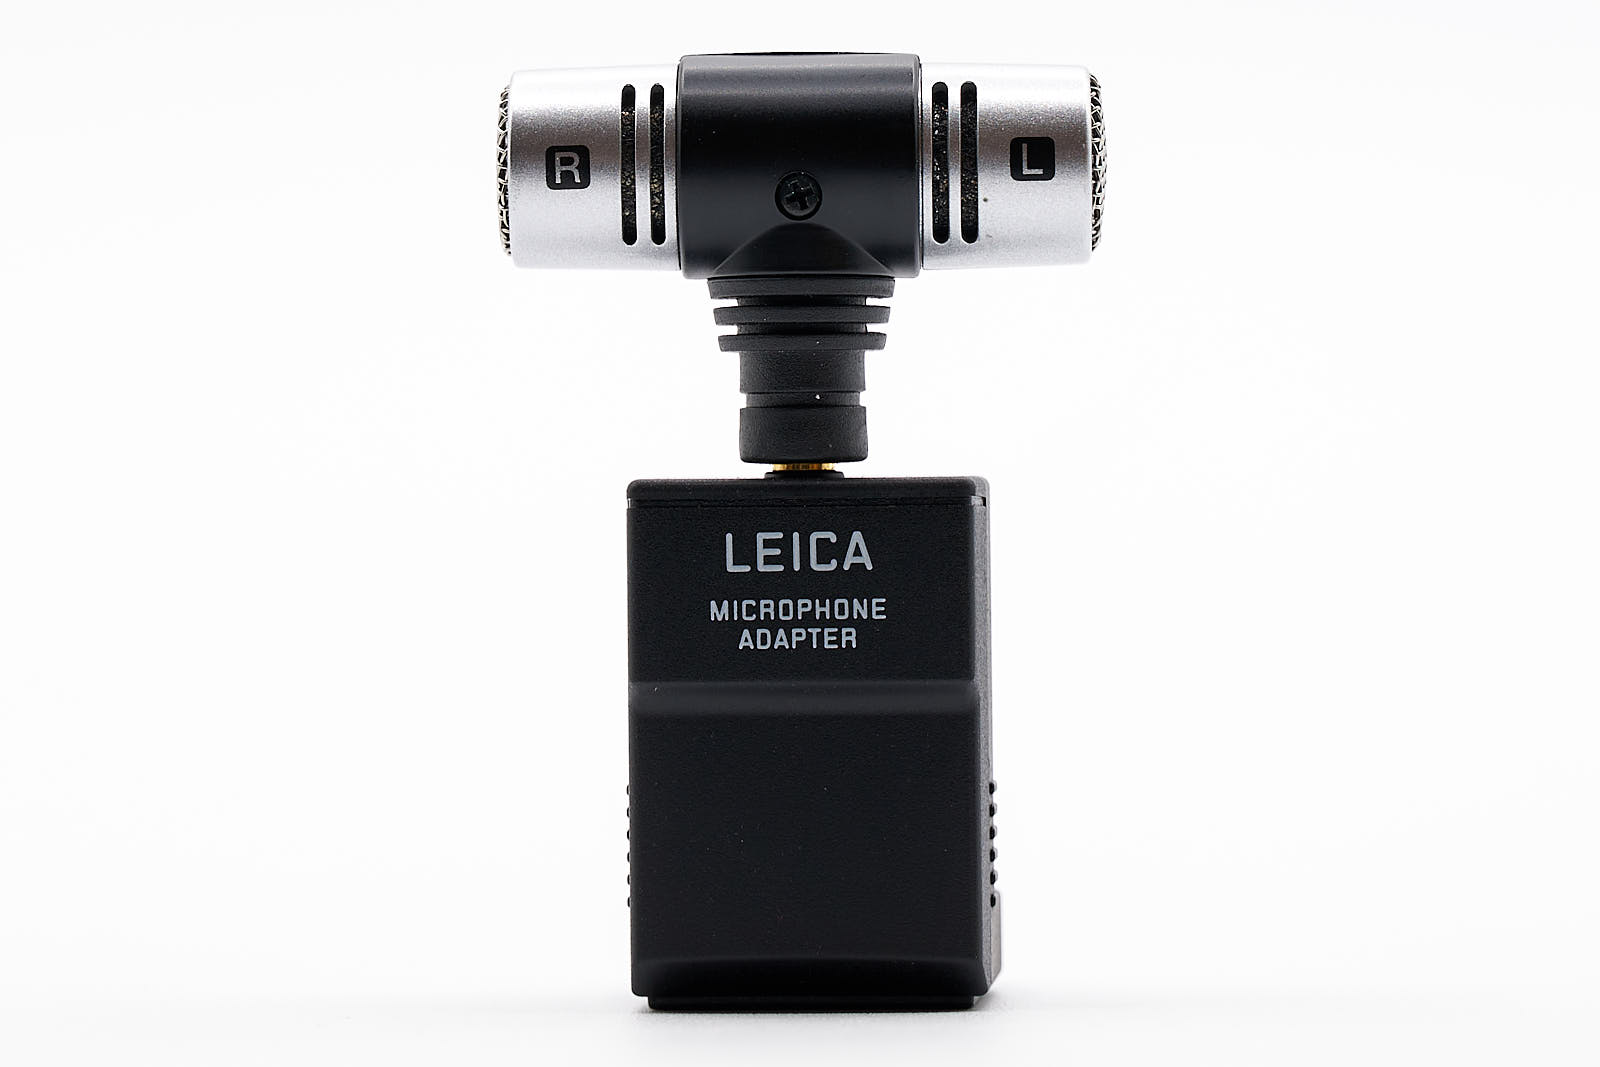 Leica Microphone Adapter